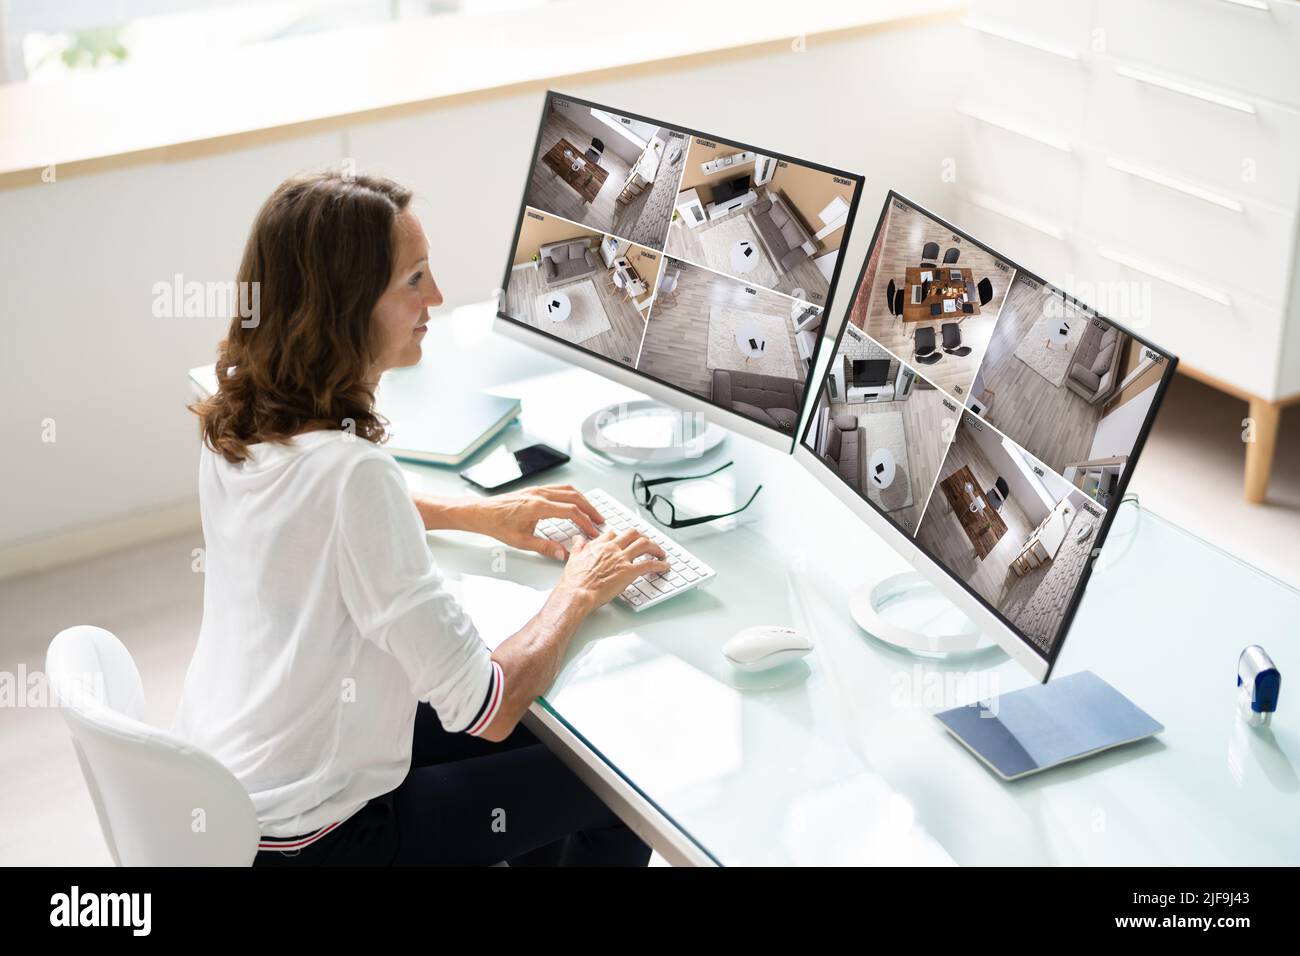 CCTV Security Footage On Multiple Computer Monitors Stock Photo